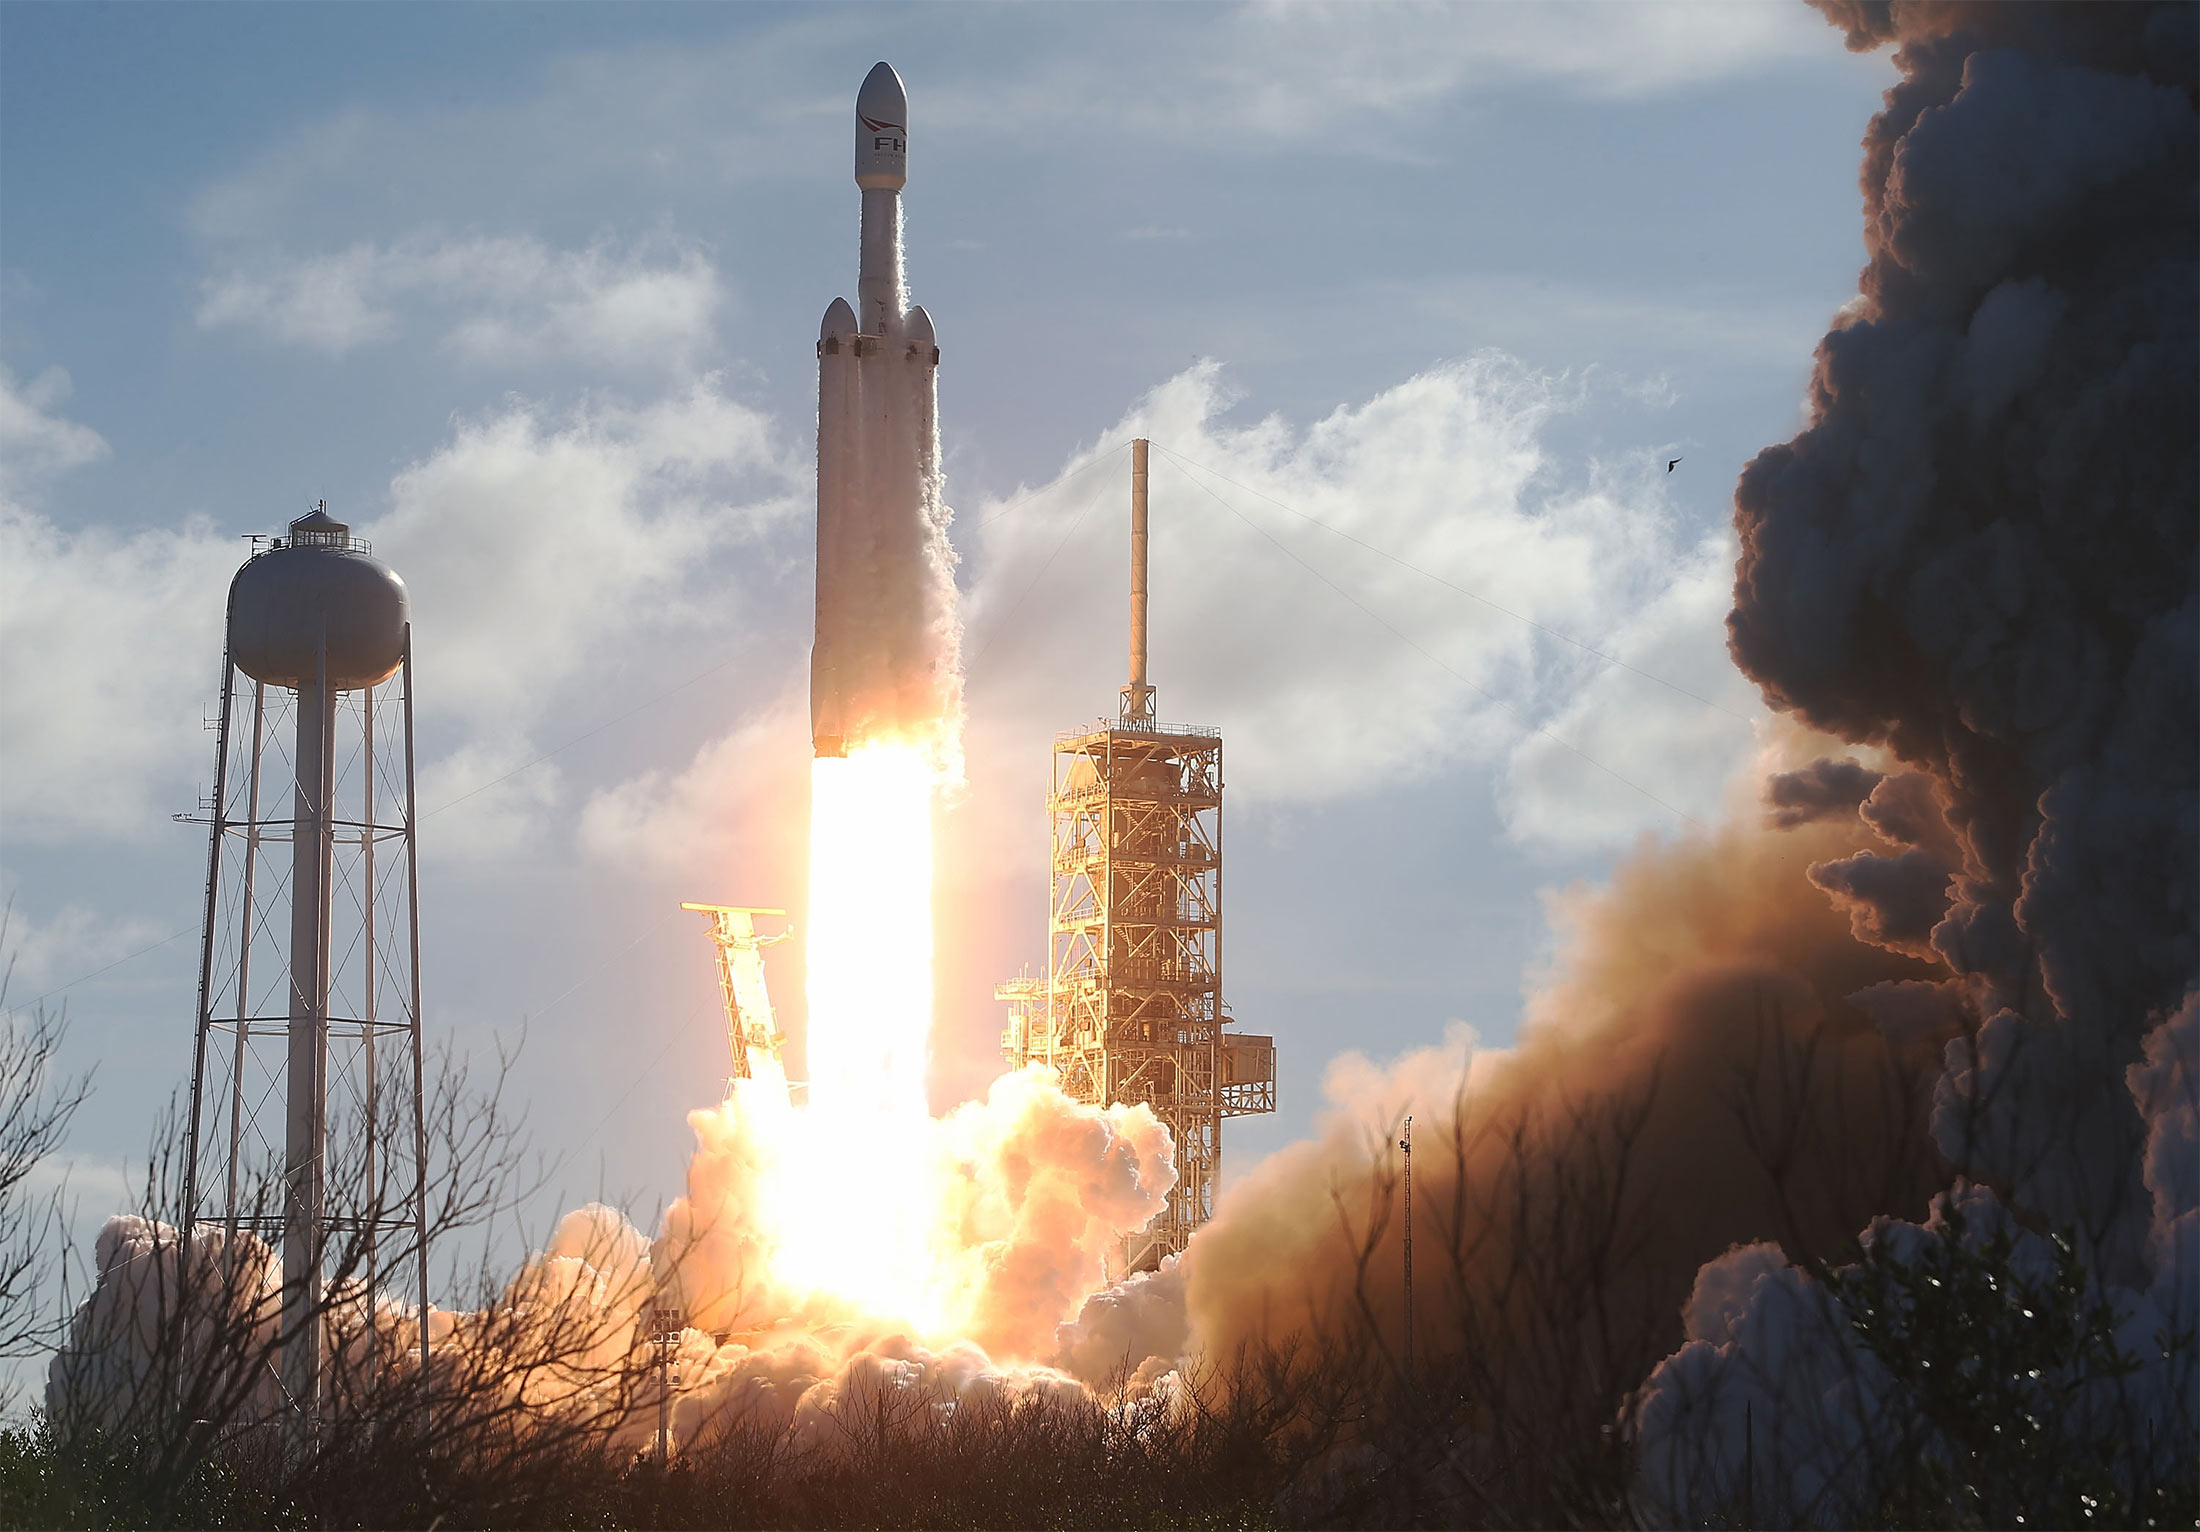 The SpaceX Falcon Heavy rocket lifts off from launch pad 39A at Kennedy Space Center in Cape Canaveral, Fla. on Feb. 6, 2018.